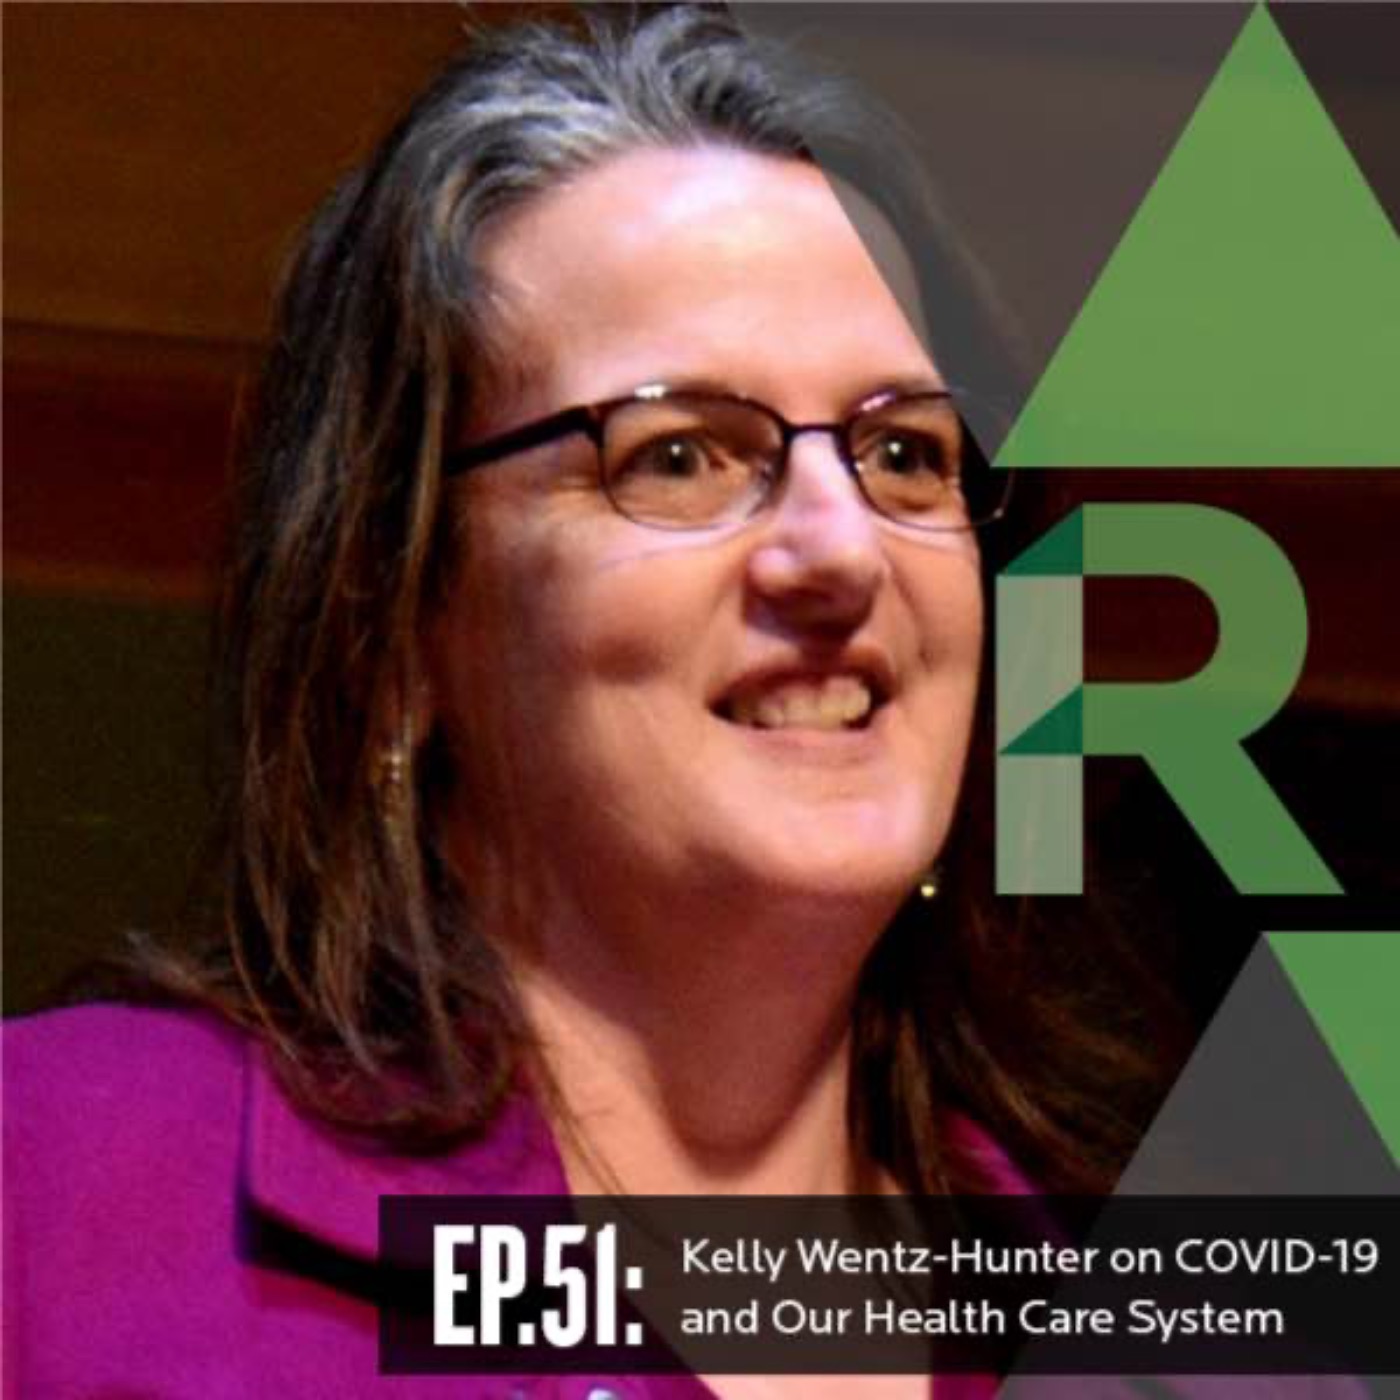 Ep 51: Kelly Wentz-Hunter on COVID-19  and Our Health Care System